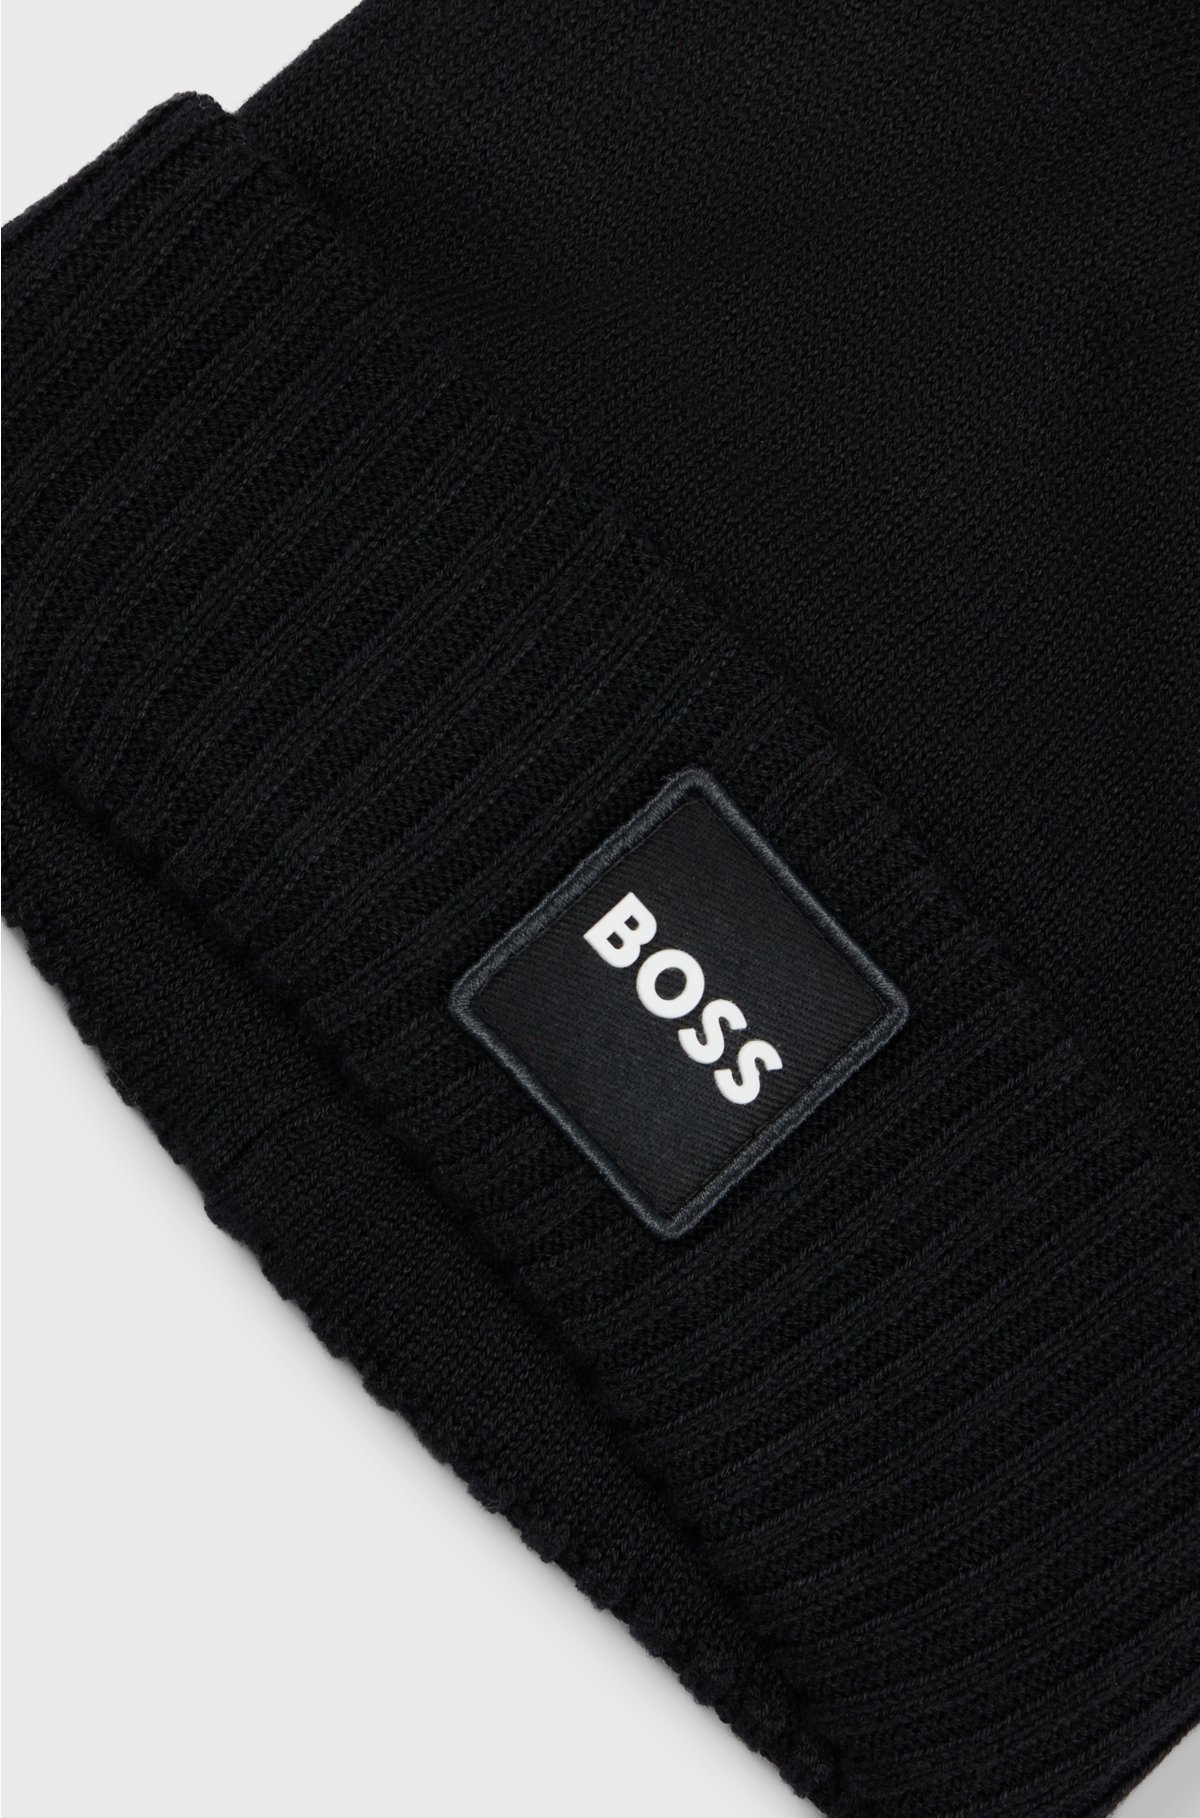 Kids' double-layer beanie hat with logo badge, Black